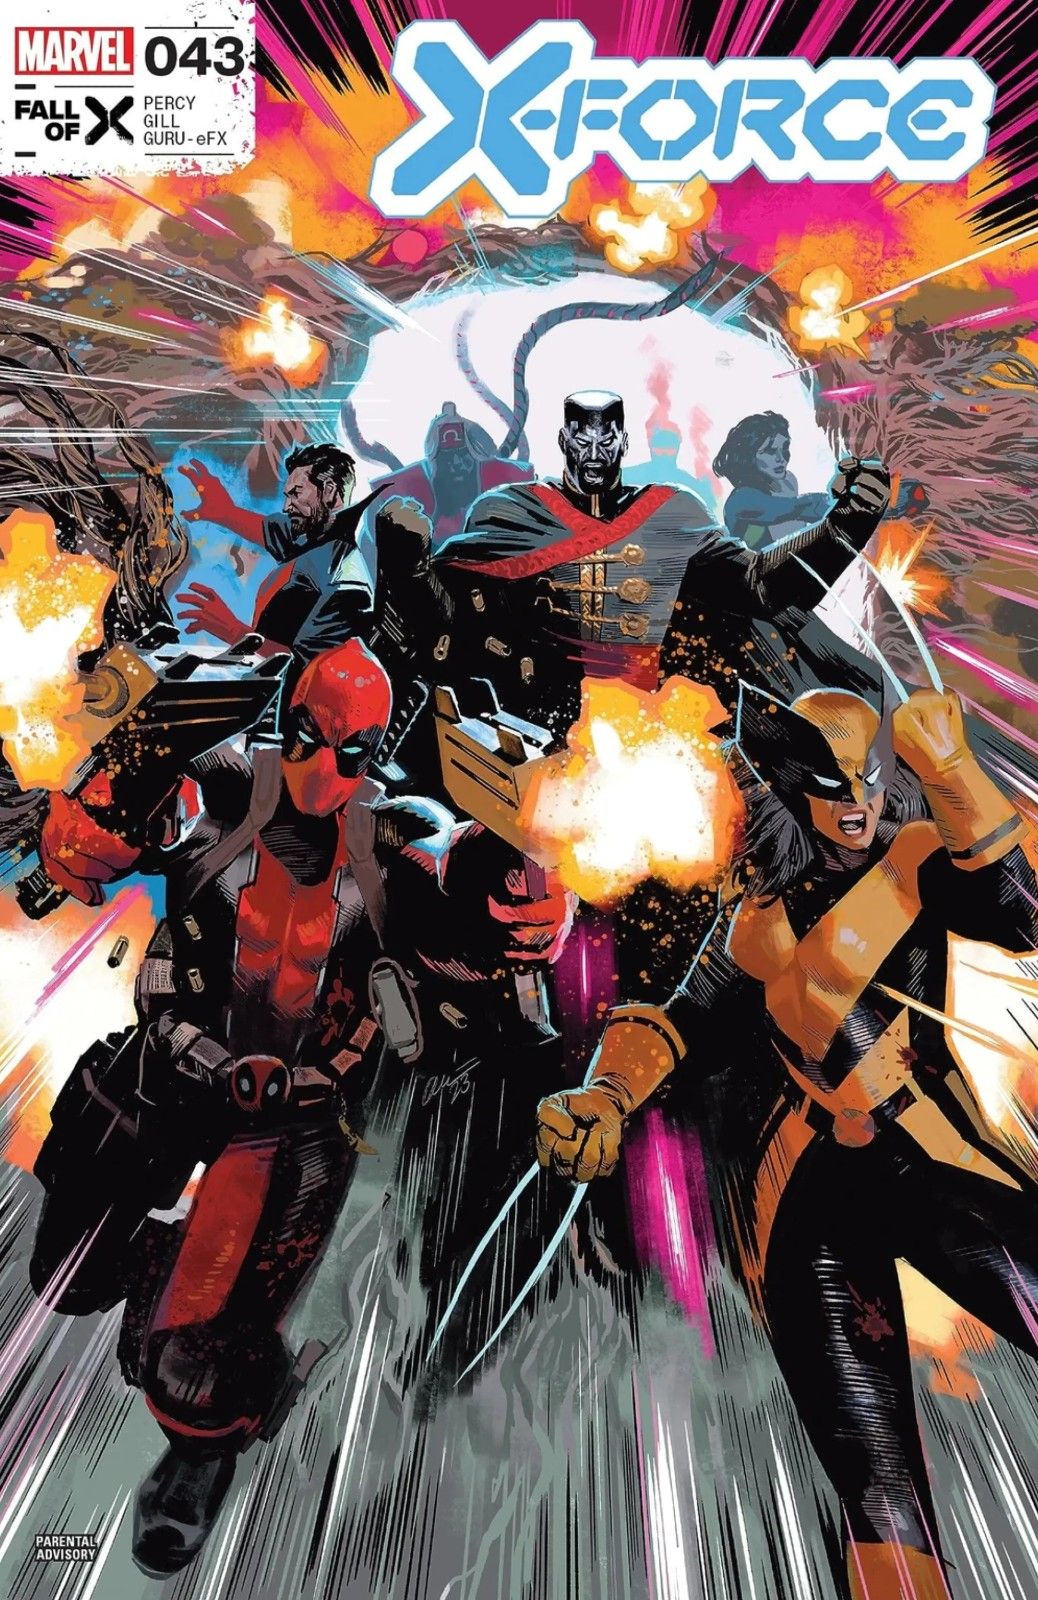 X-Force: Forge's From The Ashes Team, Explained